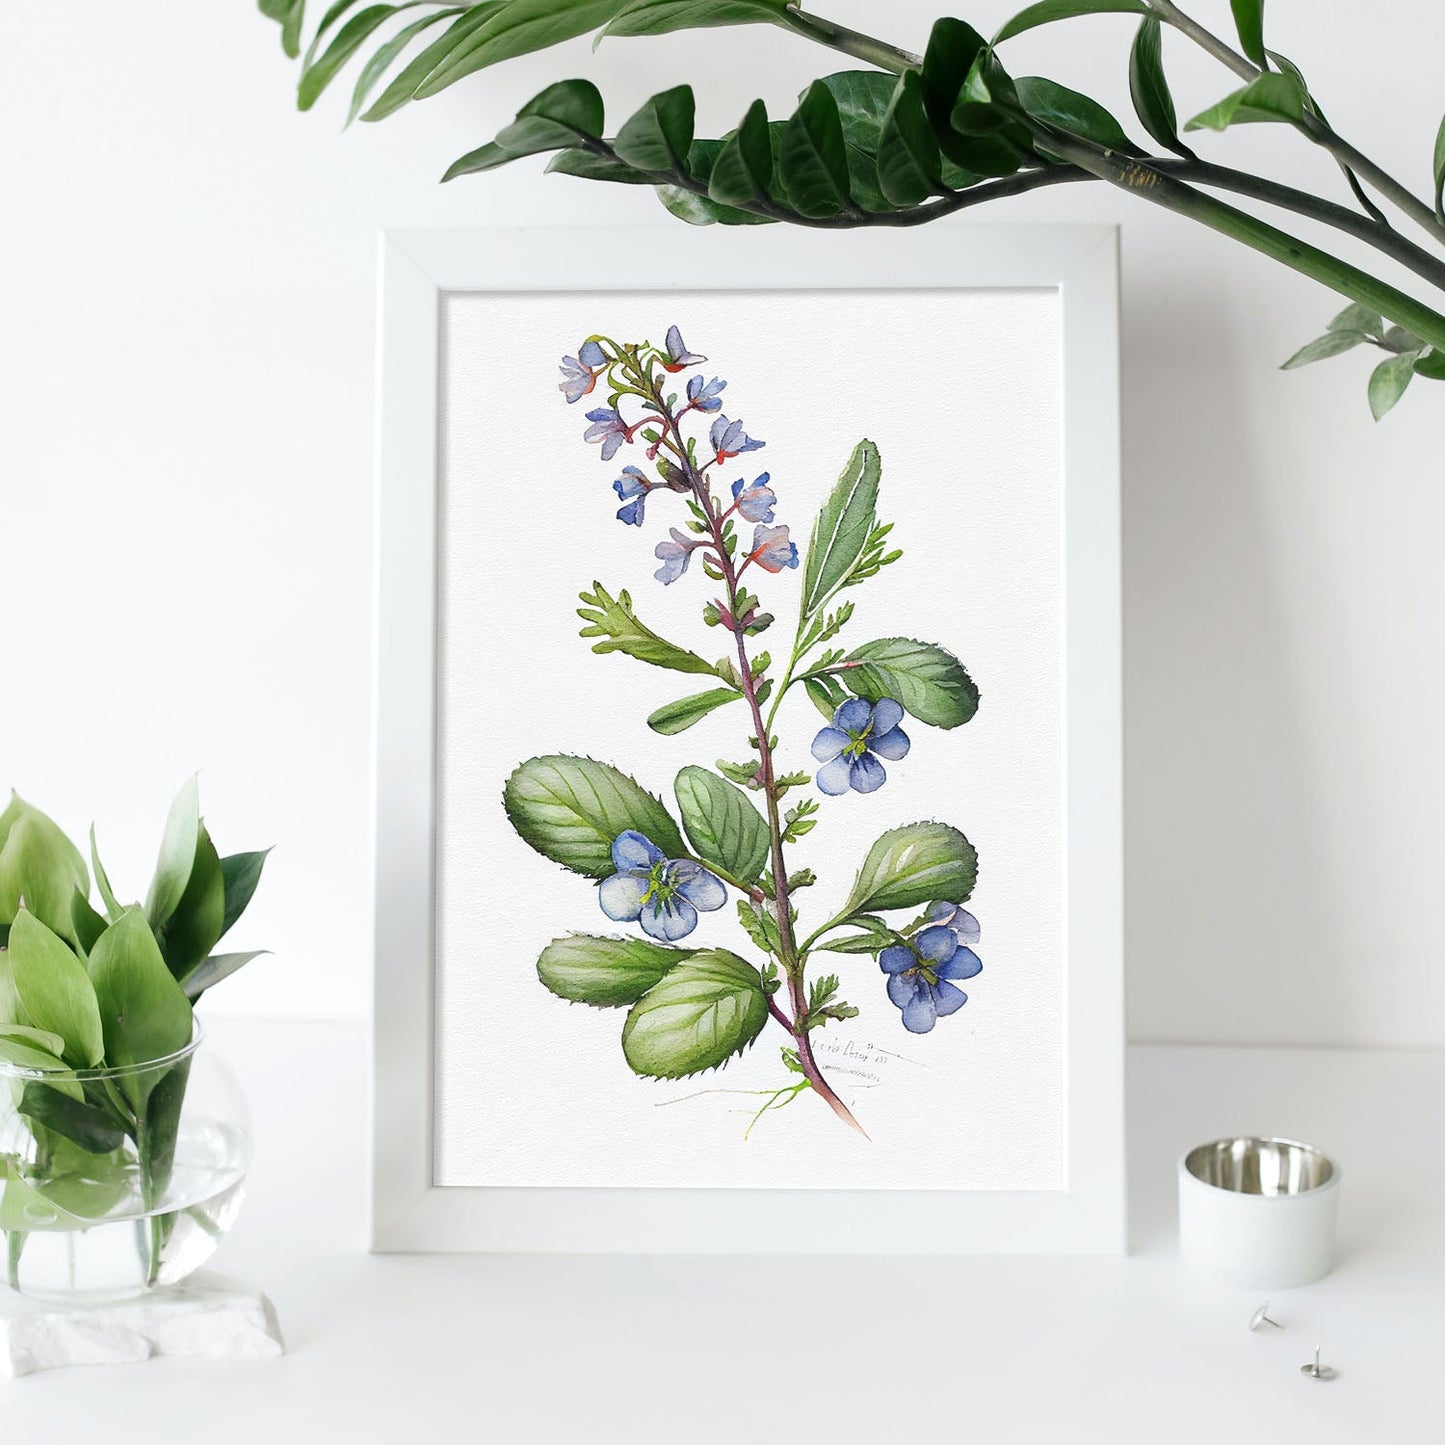 Nacnic watercolor minmal Speedwell_4. Aesthetic Wall Art Prints for Bedroom or Living Room Design.